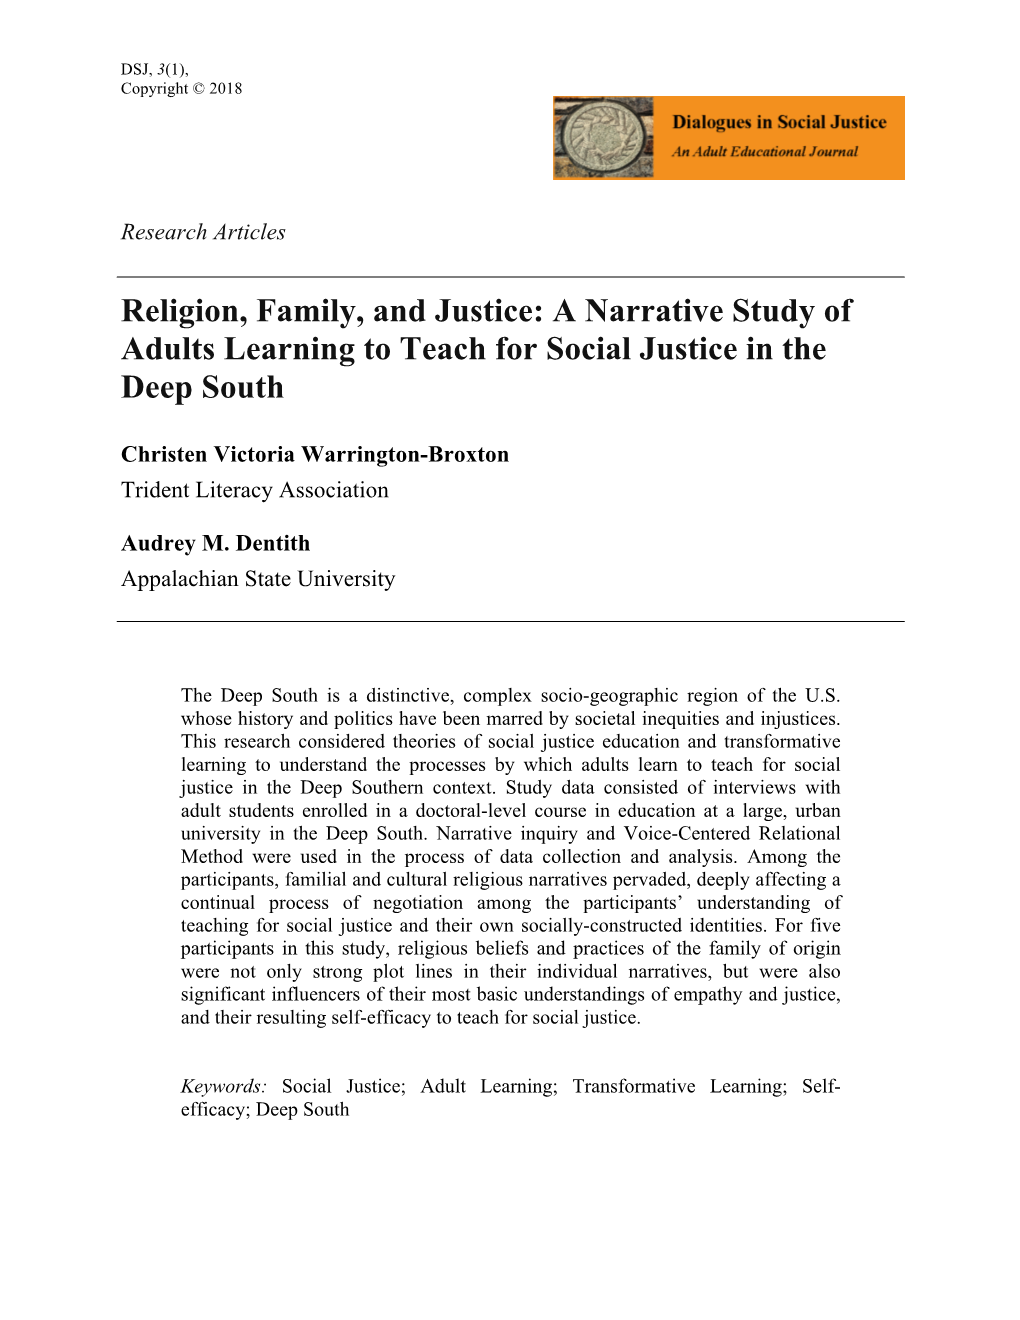 Religion, Family, and Justice: a Narrative Study of Adults Learning to Teach for Social Justice in the Deep South